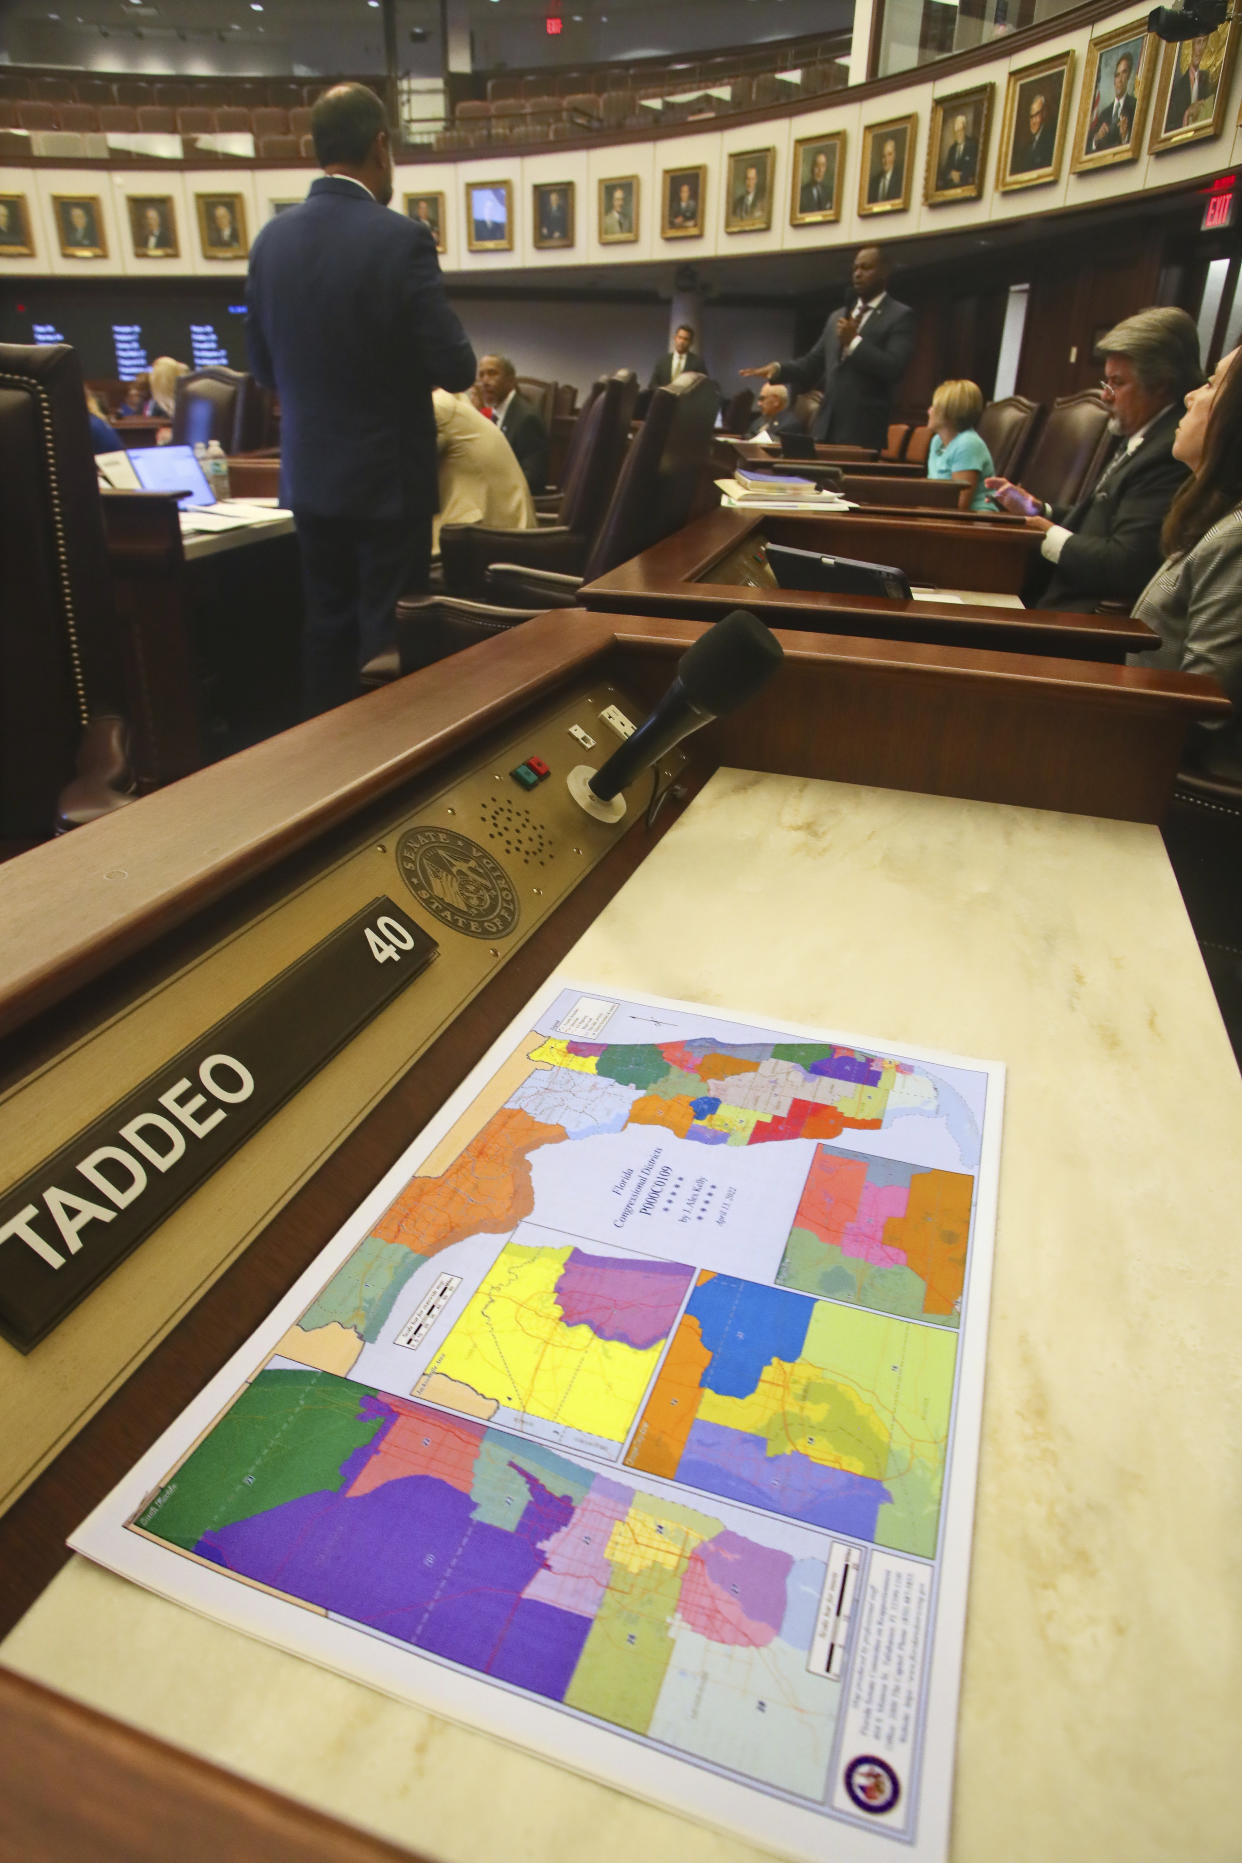 A redistricting map sits on the desk of Sen. Annette Taddeo, D-Miami as debate on amendments to Senate Bill 2-C: Establishing the Congressional Districts of the State goes on during an evening meeting of the Senate Tuesday, April 19, 2022 at the Capitol in Tallahassee, Fla. Taddeo chose to boycott the special session. The Florida special session to address new district lines continues Wednesday. (AP Photo/Phil Sears)